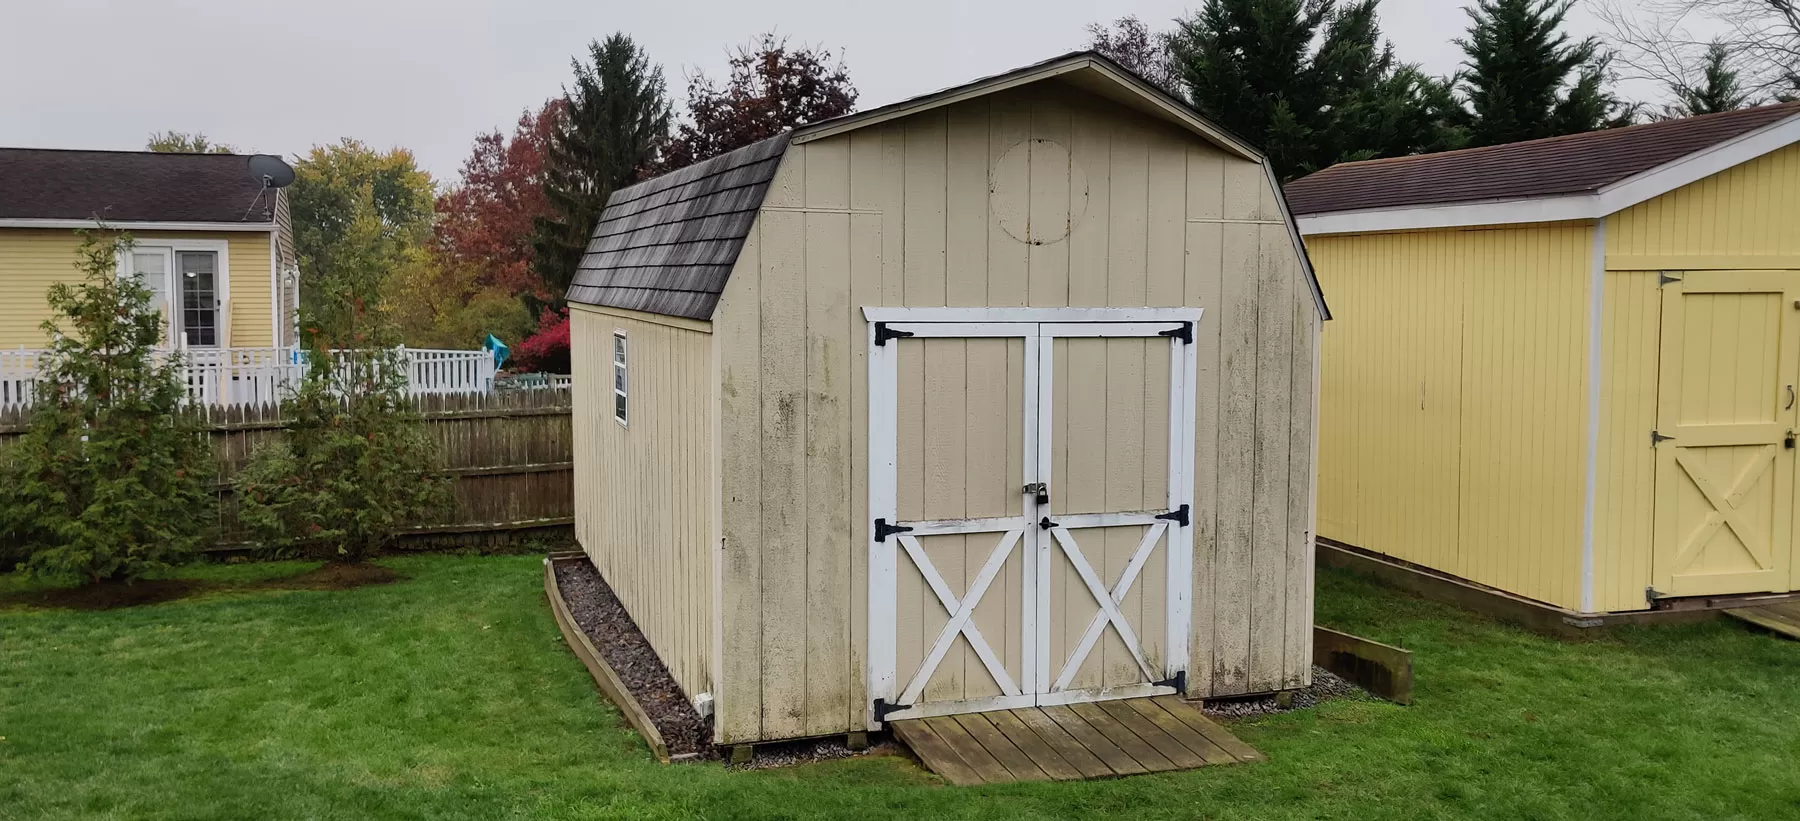 Shed Repair Services In Lancaster Pa